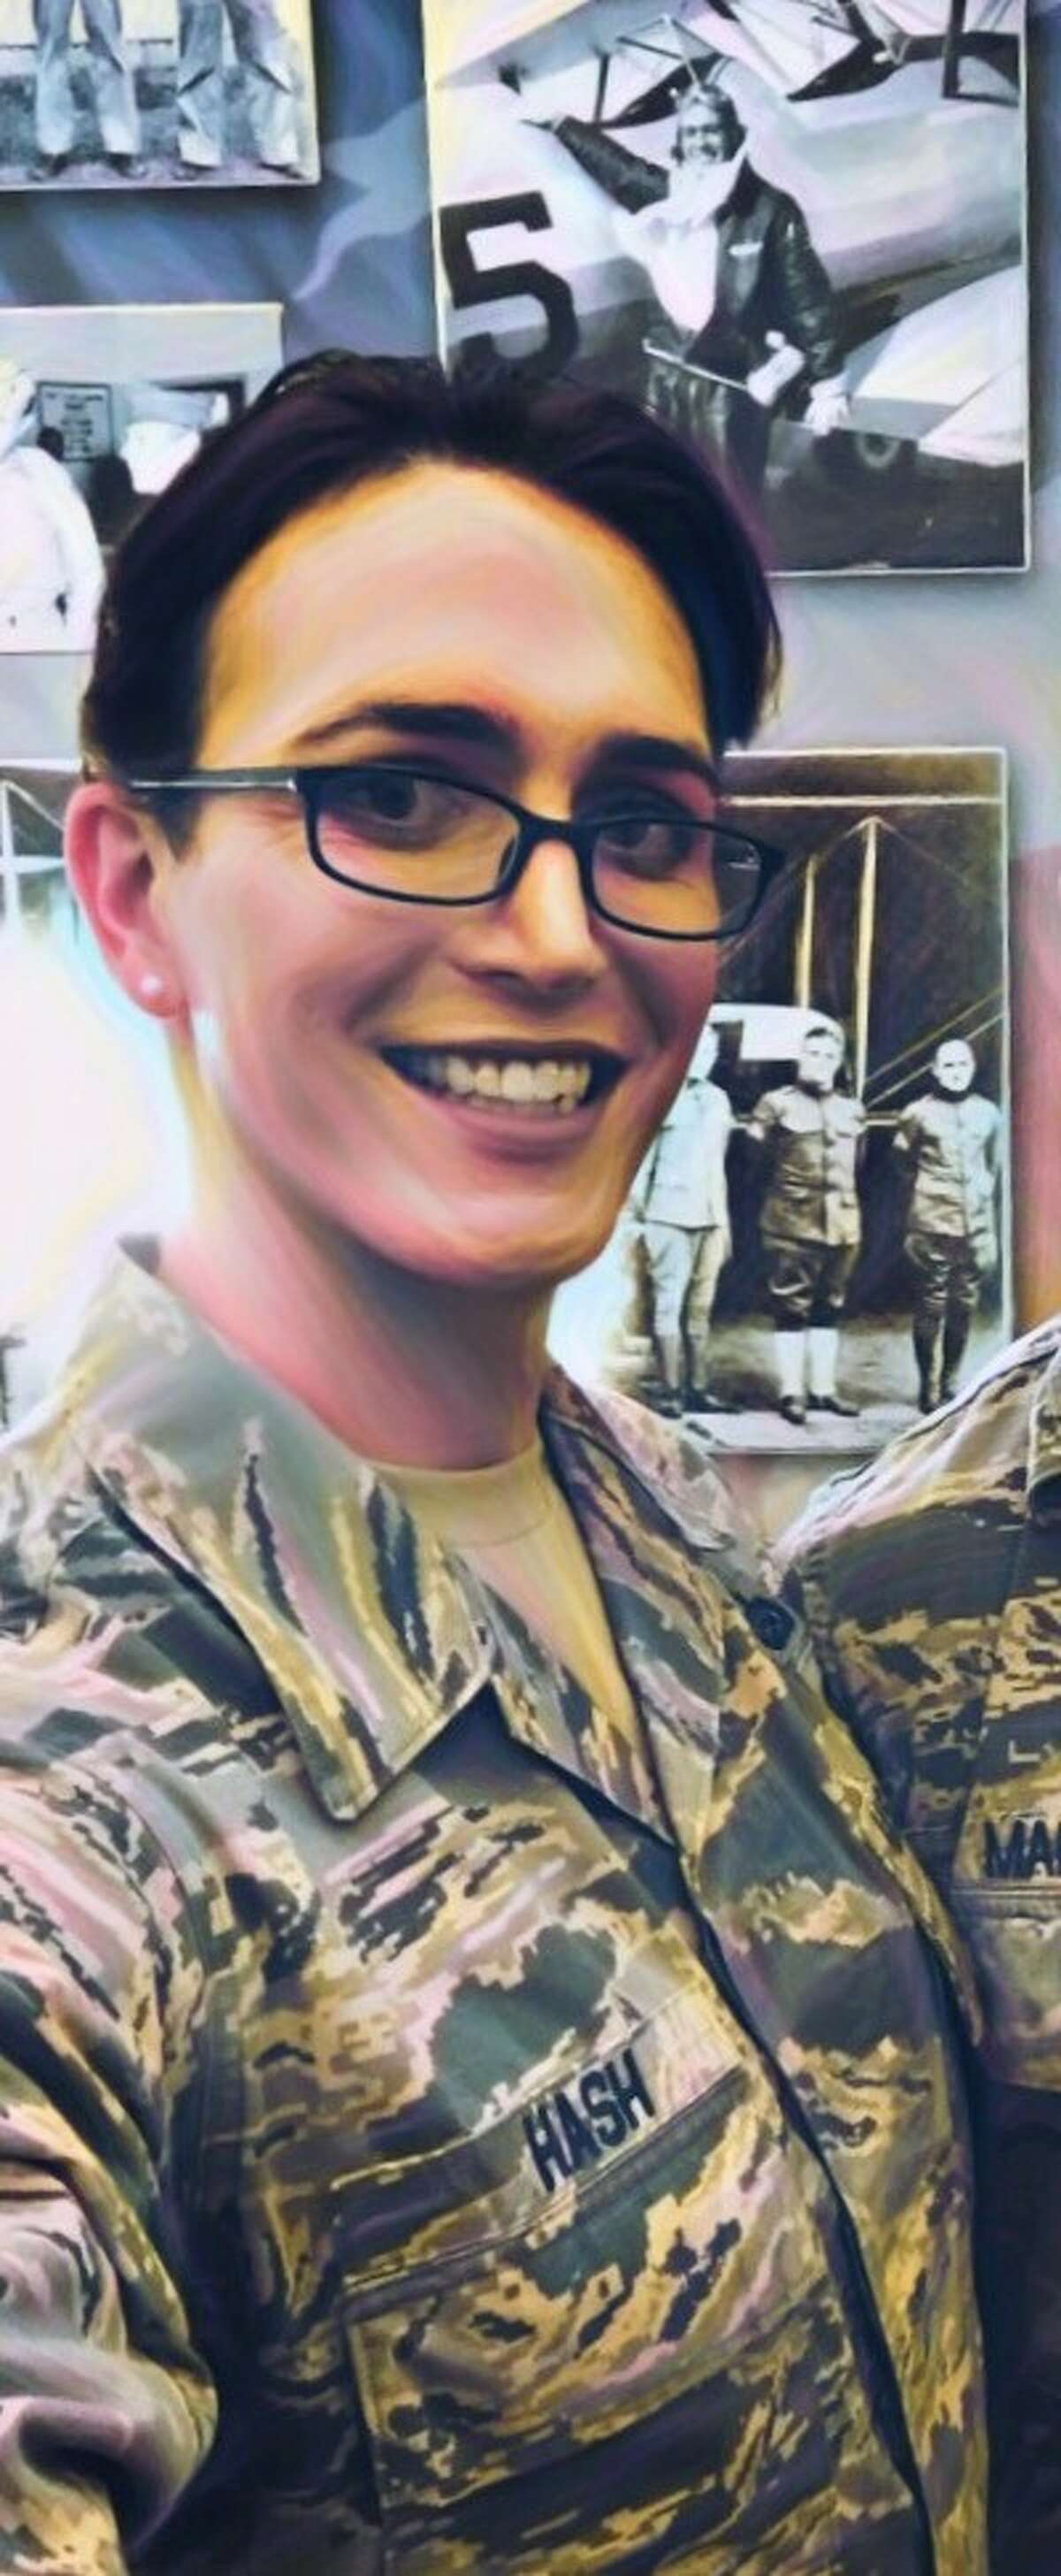 Jamie Hash is a transgender member of the Air Force stationed at Randolph Air Force Base.